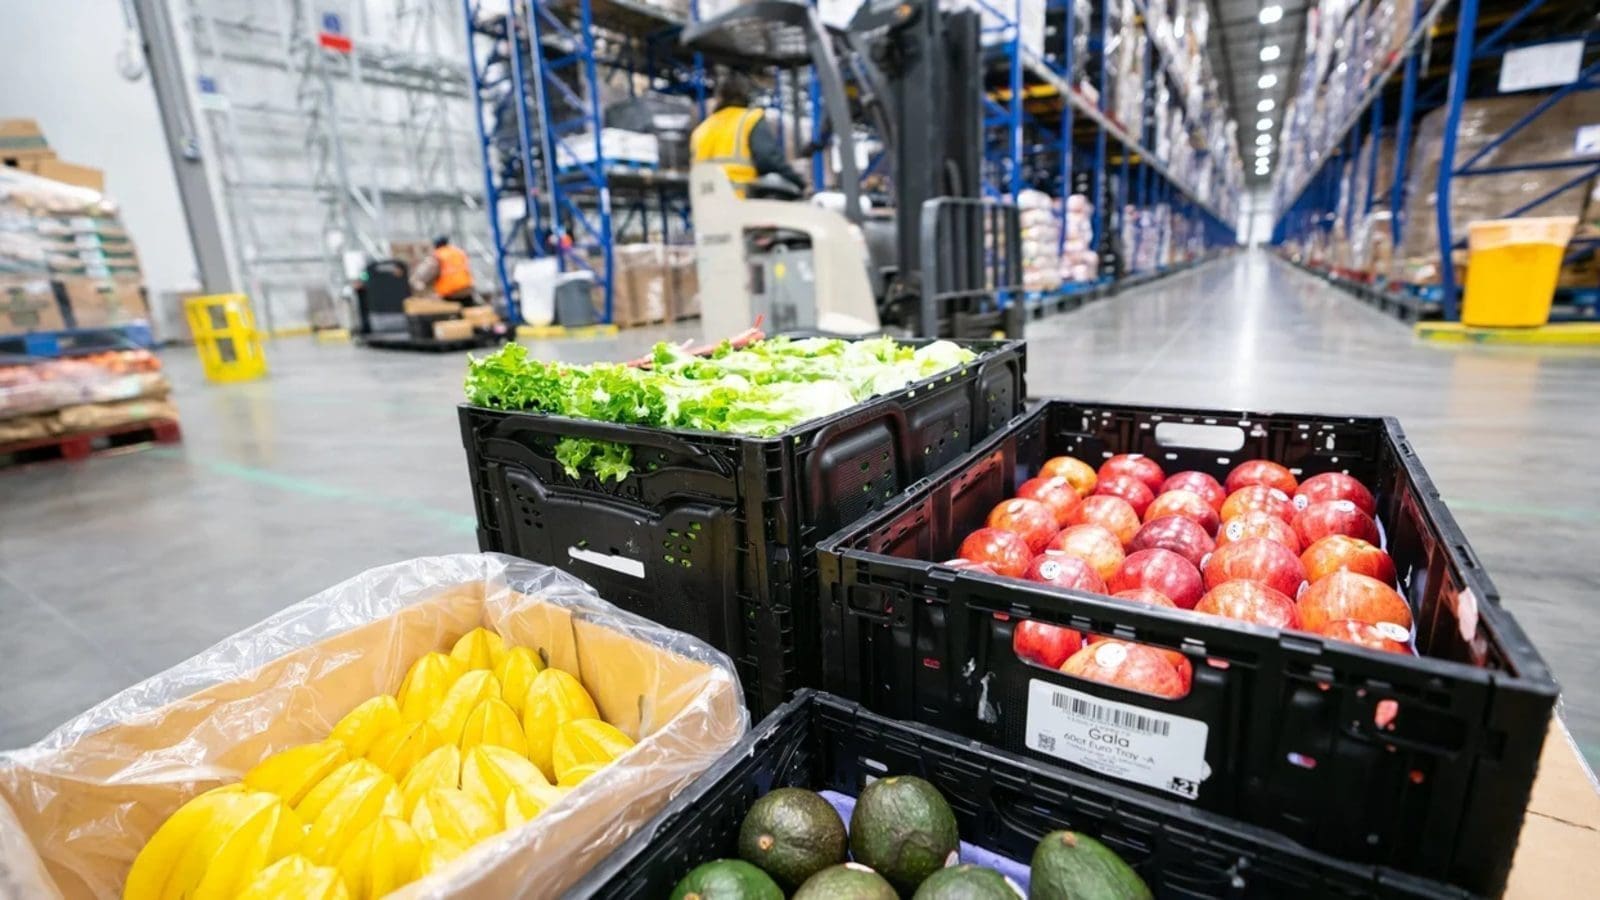 South Africa’s perishable produce exports surged by 8% in 2022 amid challenging environment